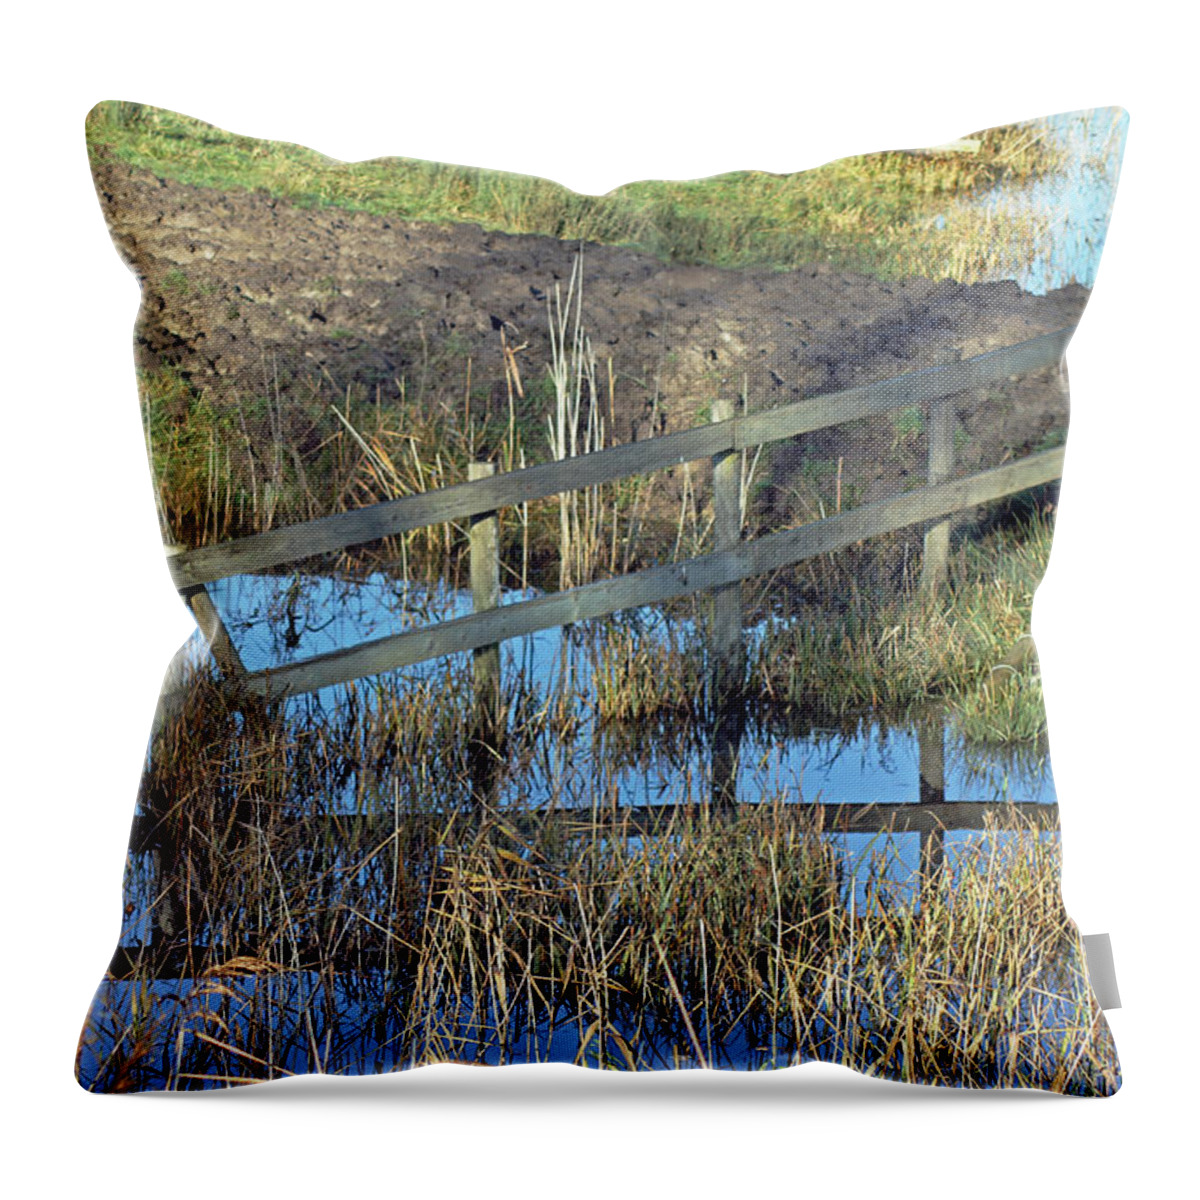 Landscapes Throw Pillow featuring the photograph Reflections of a Fence by Tony Murtagh